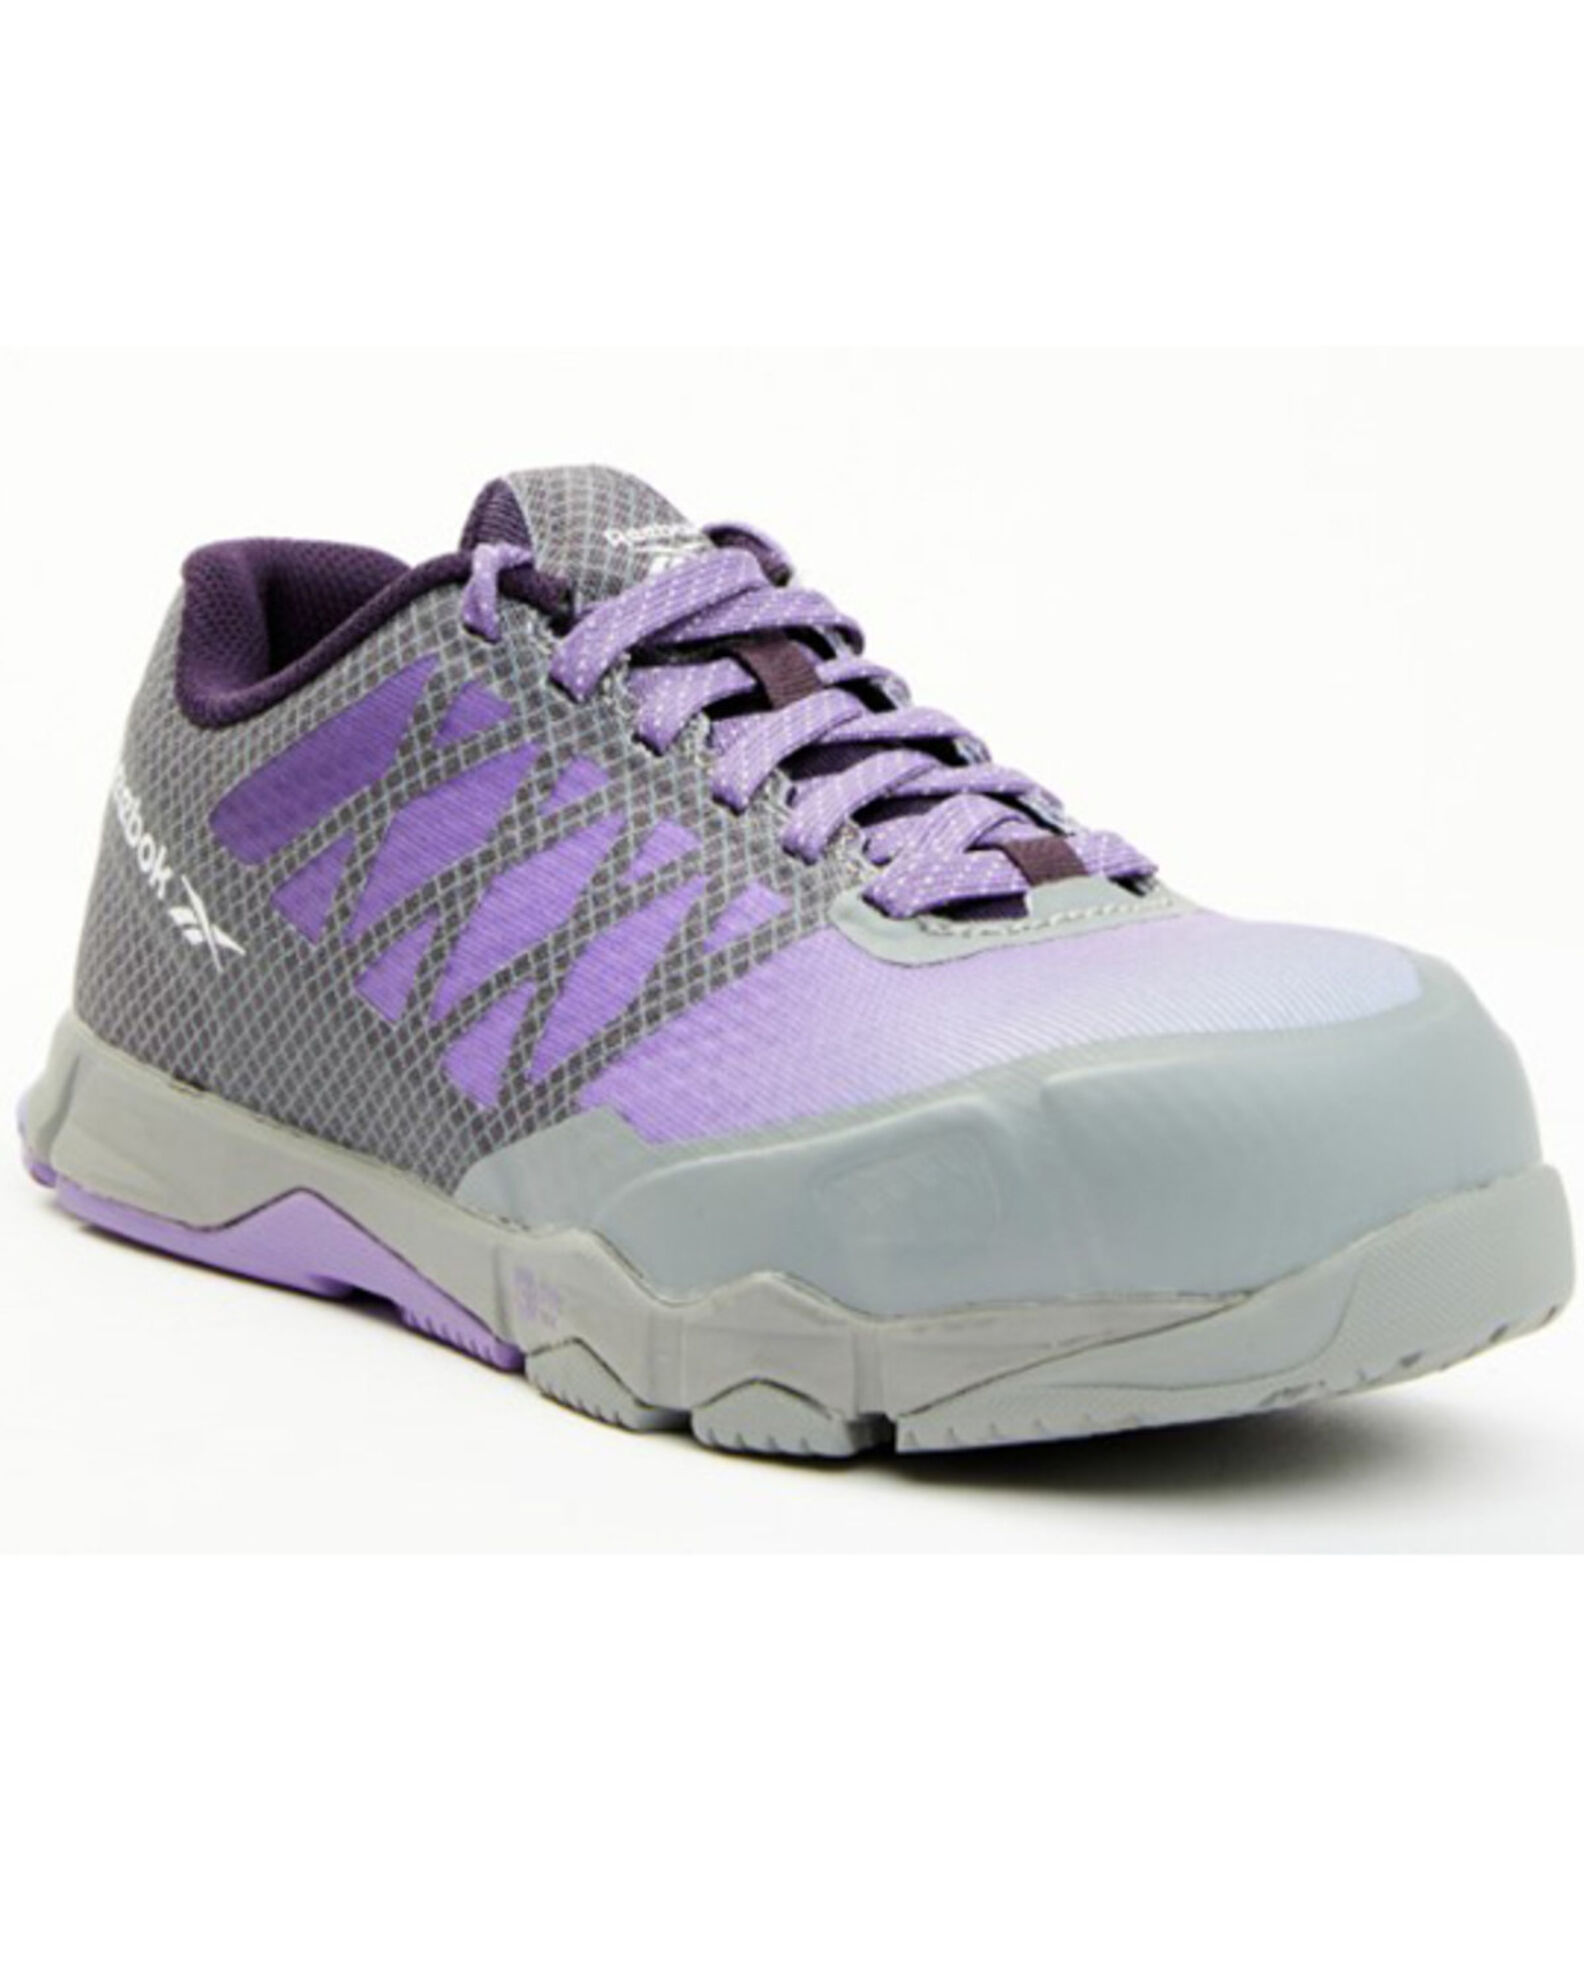 Reebok Women's Anomar Shoes - Composition | Boot Barn